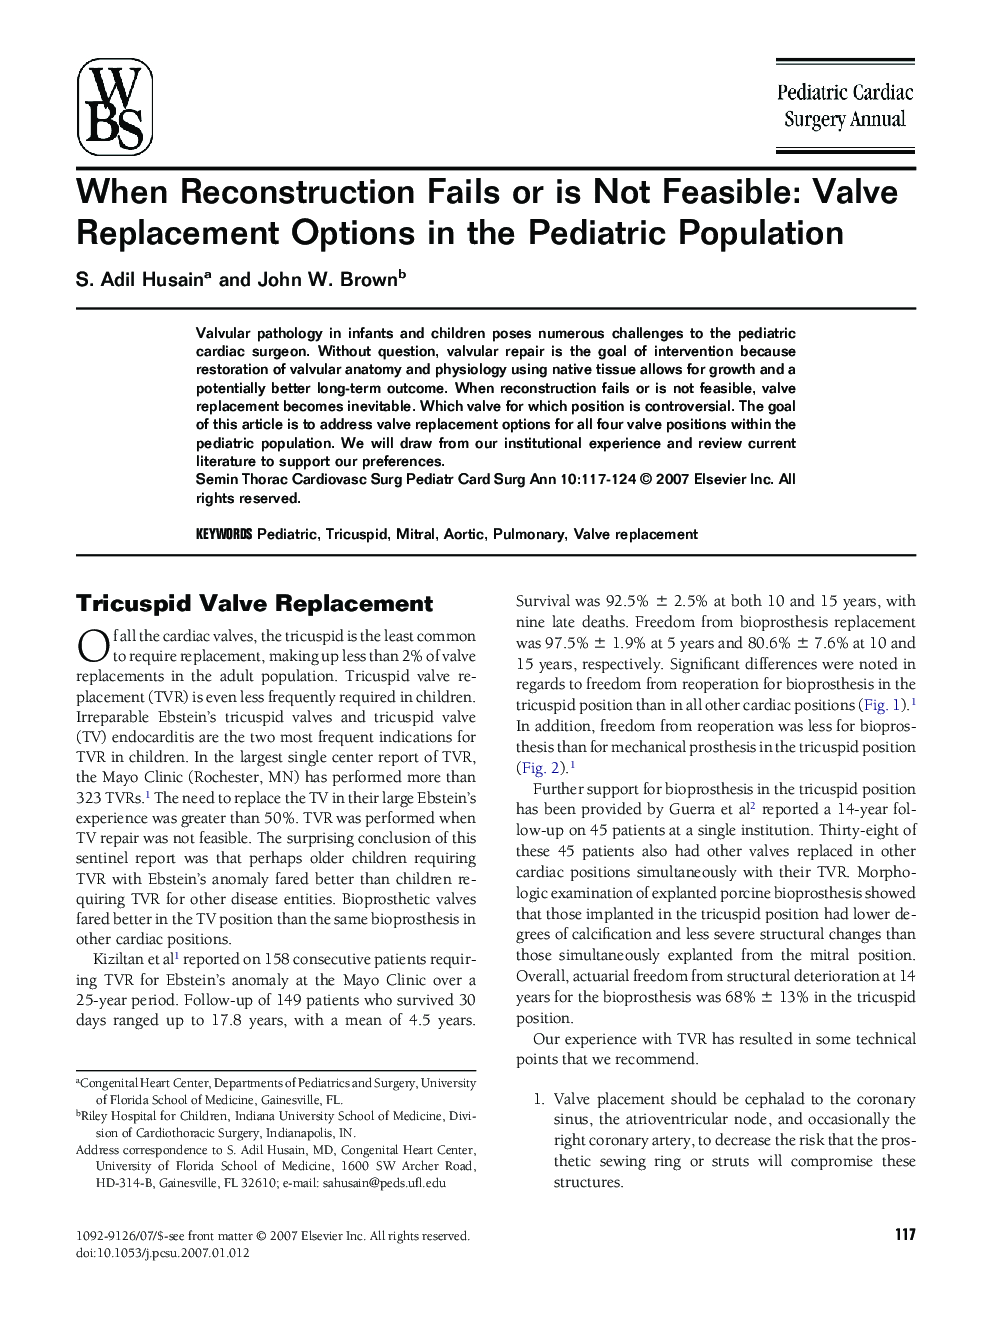 When Reconstruction Fails or is Not Feasible: Valve Replacement Options in the Pediatric Population